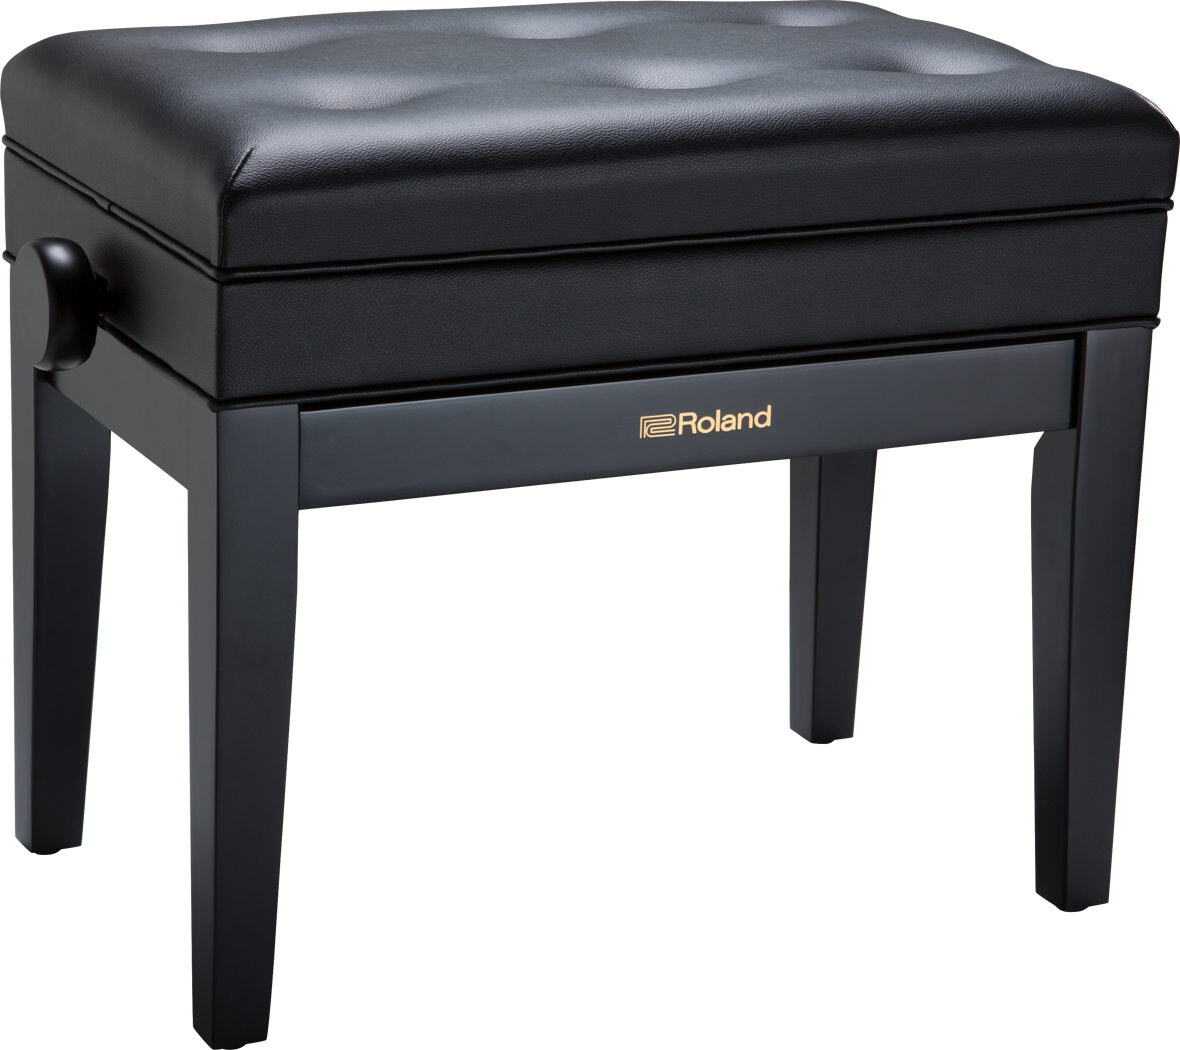 Roland HP704 Charcoal Black & Bench Seat